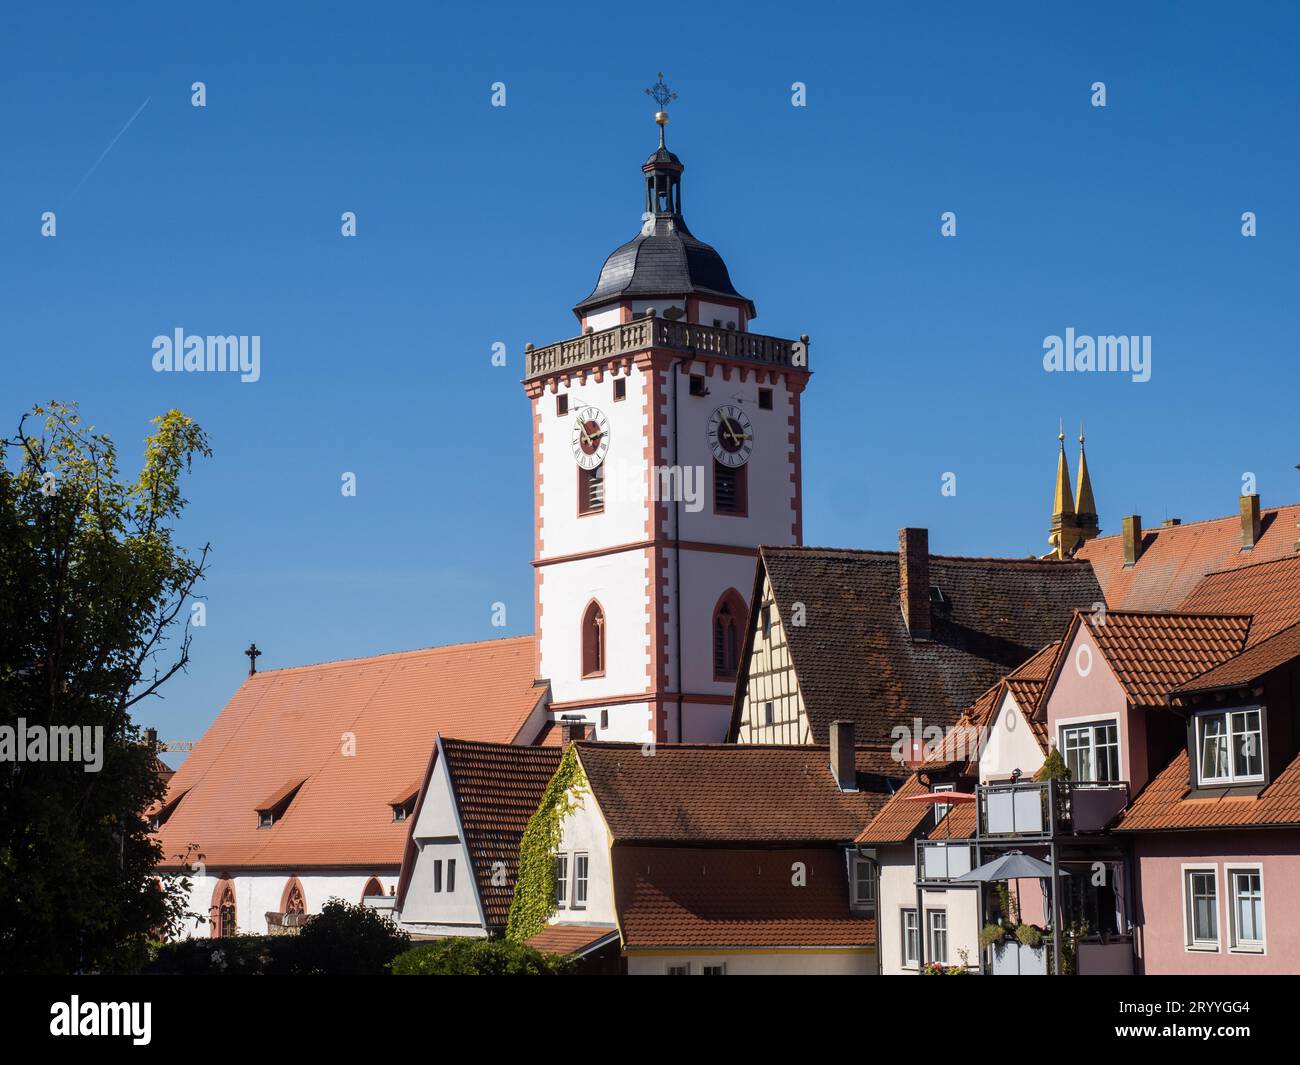 Town of Marktbreit, tower of the church of St. Nicholas, district of Kitzingen, Lower Franconia, Bavaria, Germany Stock Photo